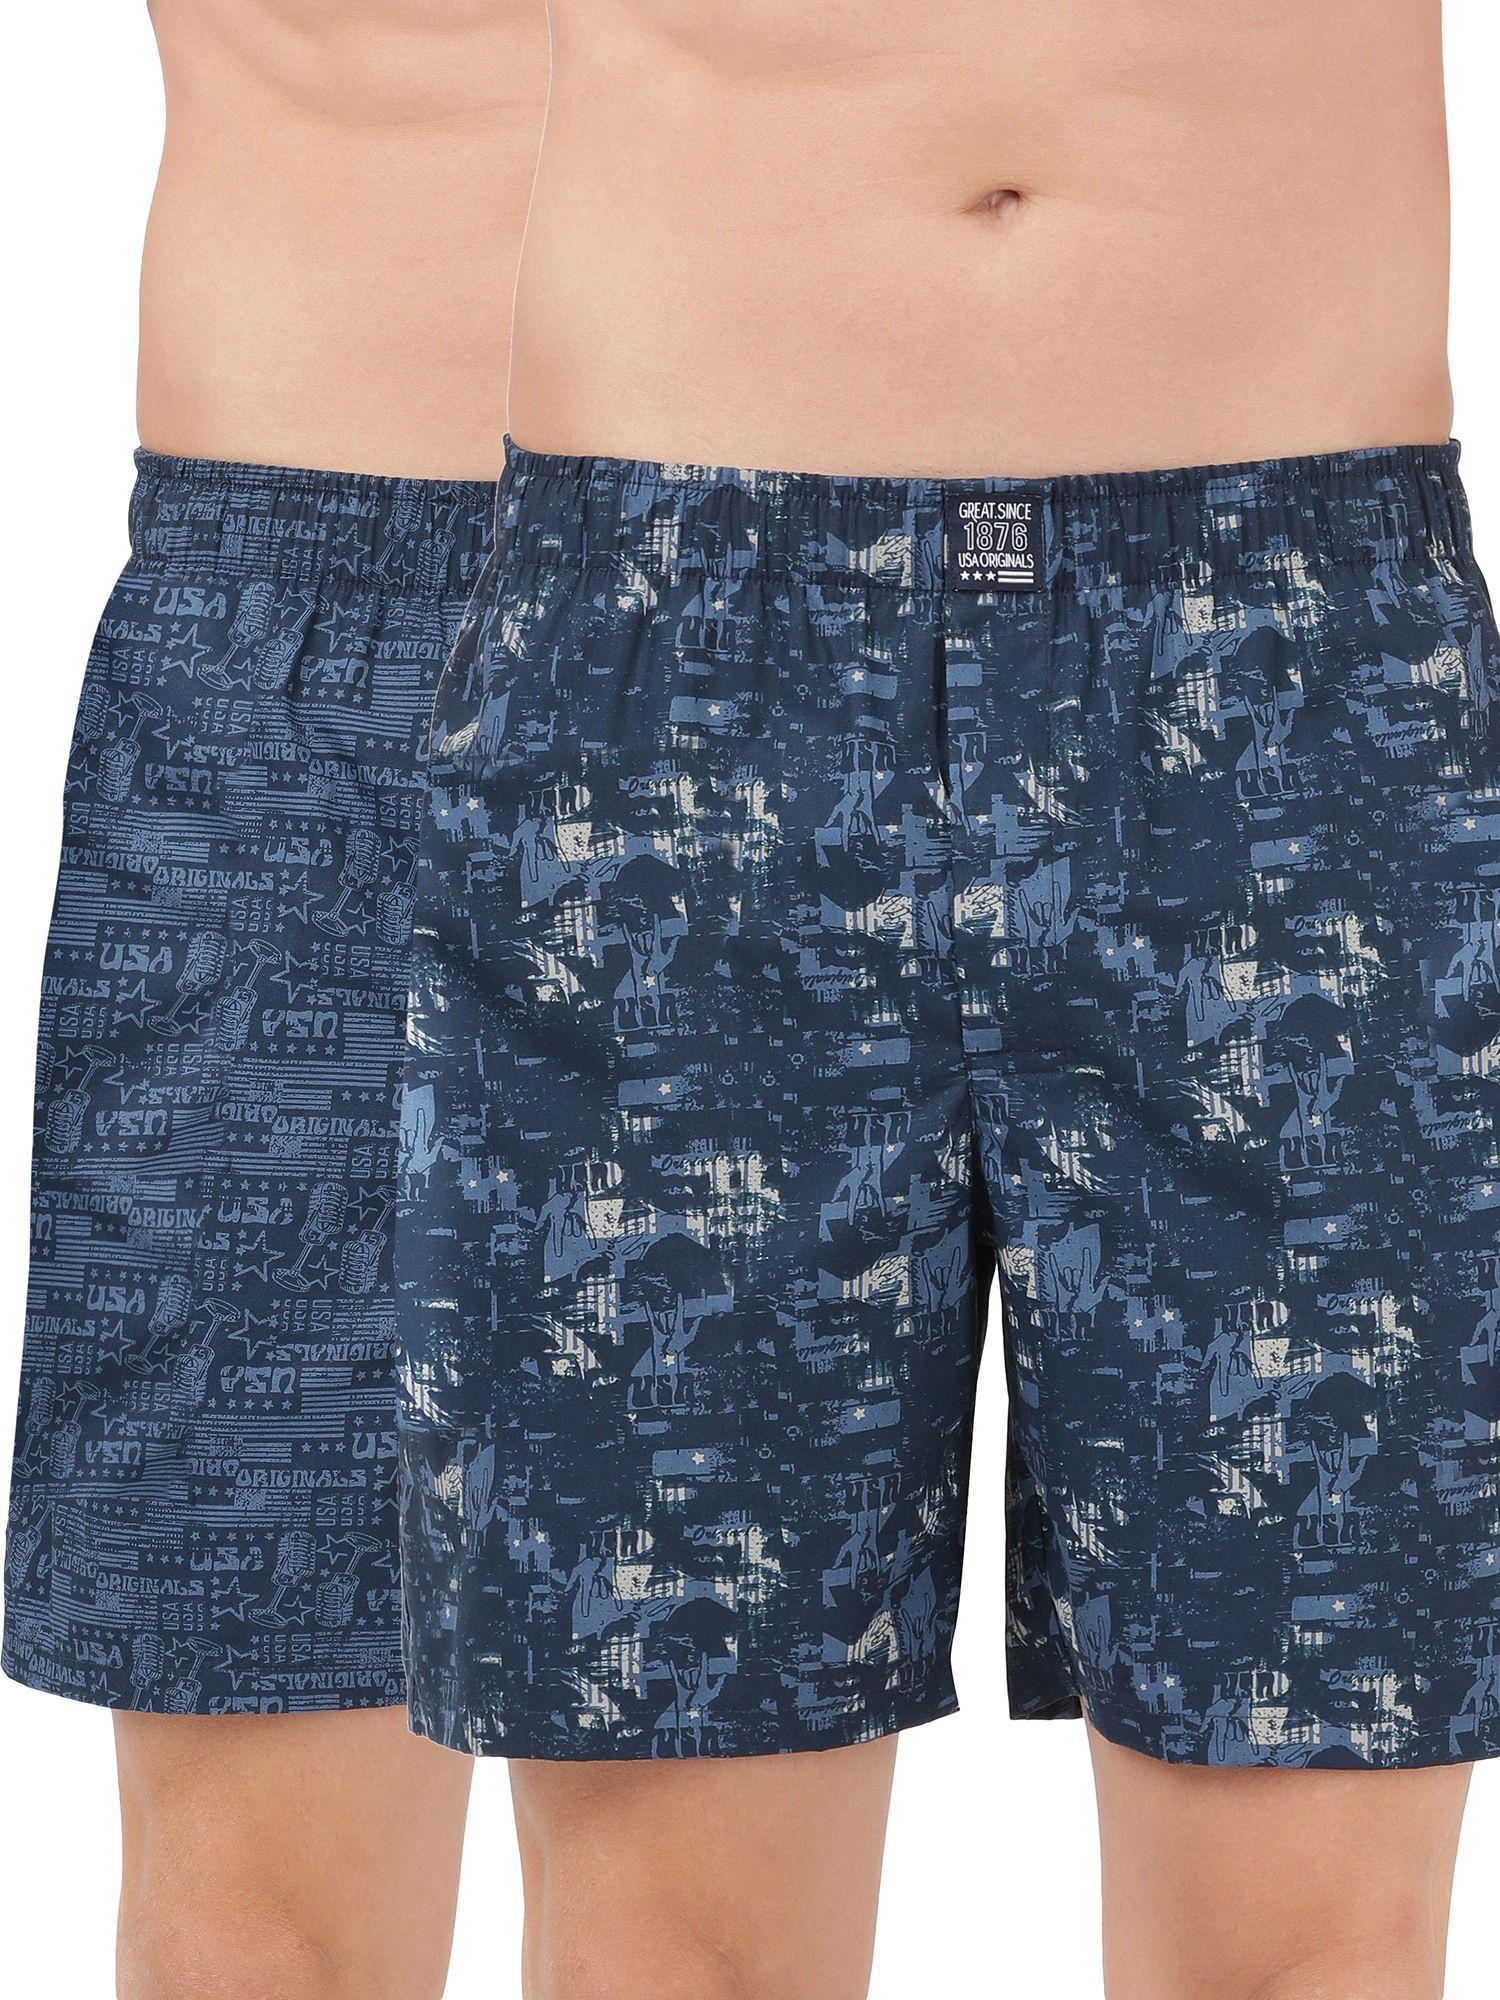 us57-mens-cotton-woven-boxer-shorts-with-side-pocket---navy-(pack-of-2)